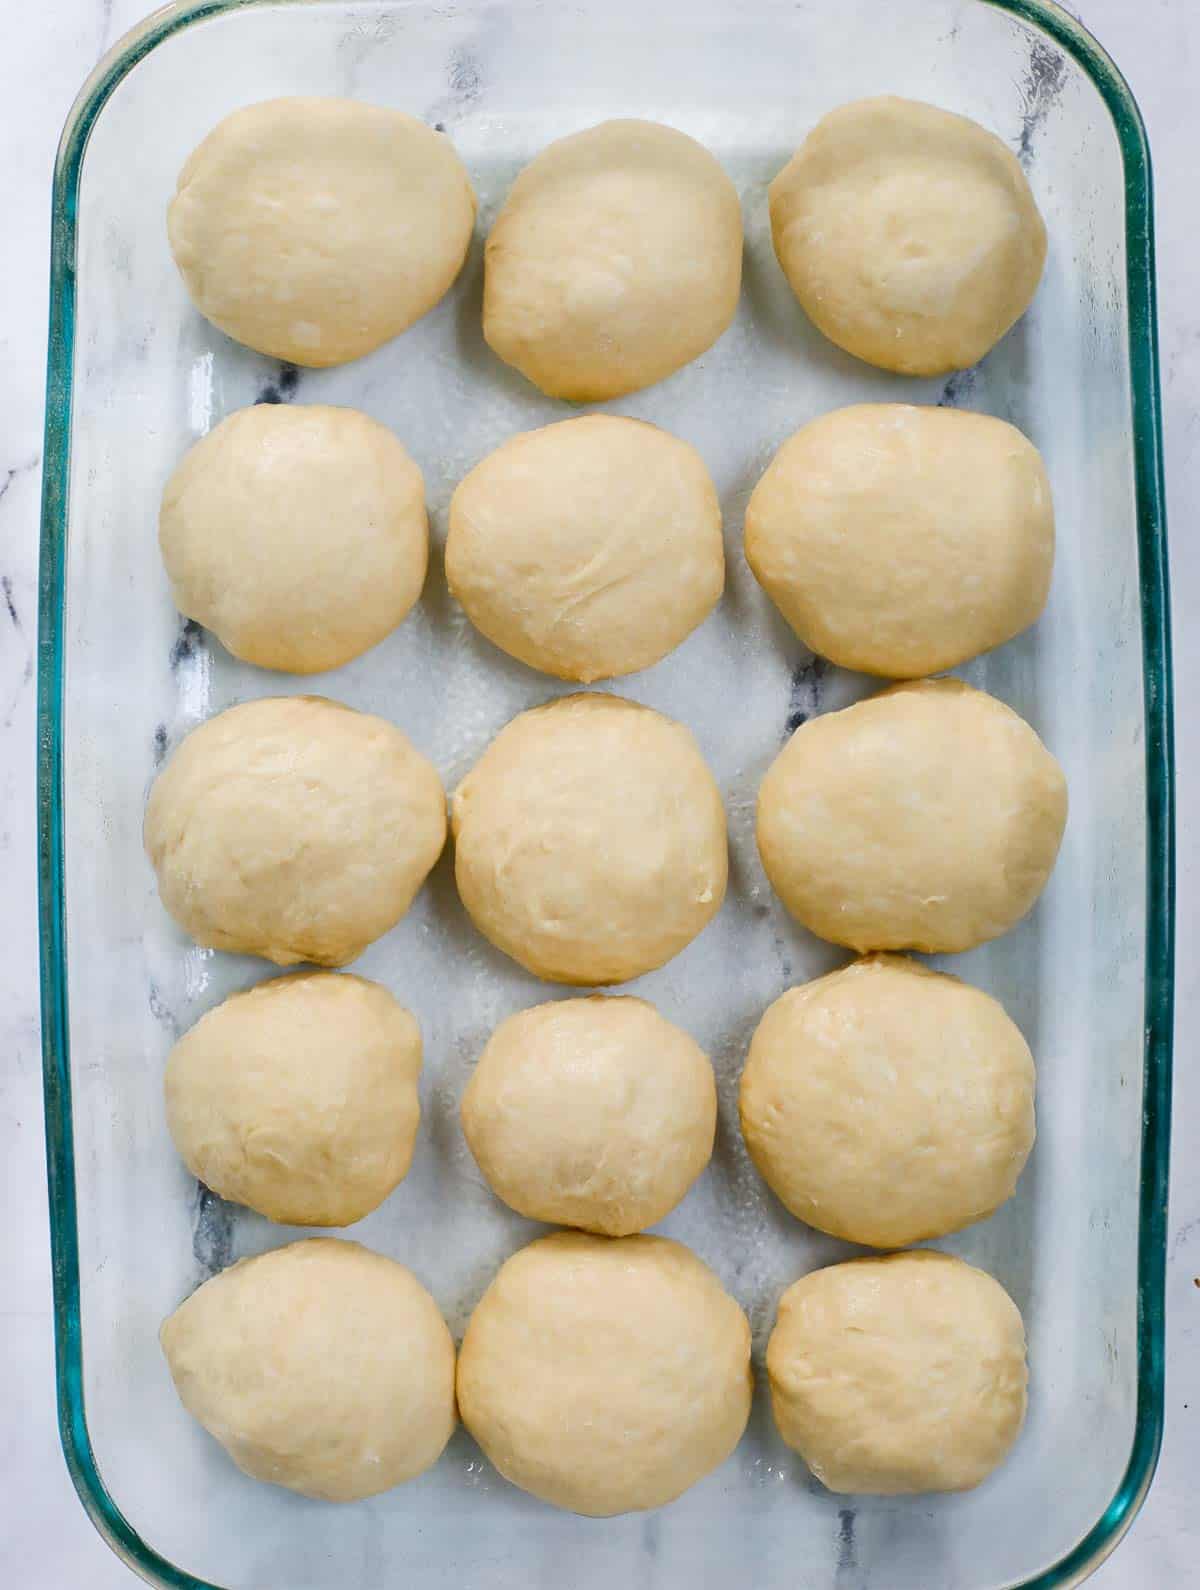 dough balls lined up in a baking dish.